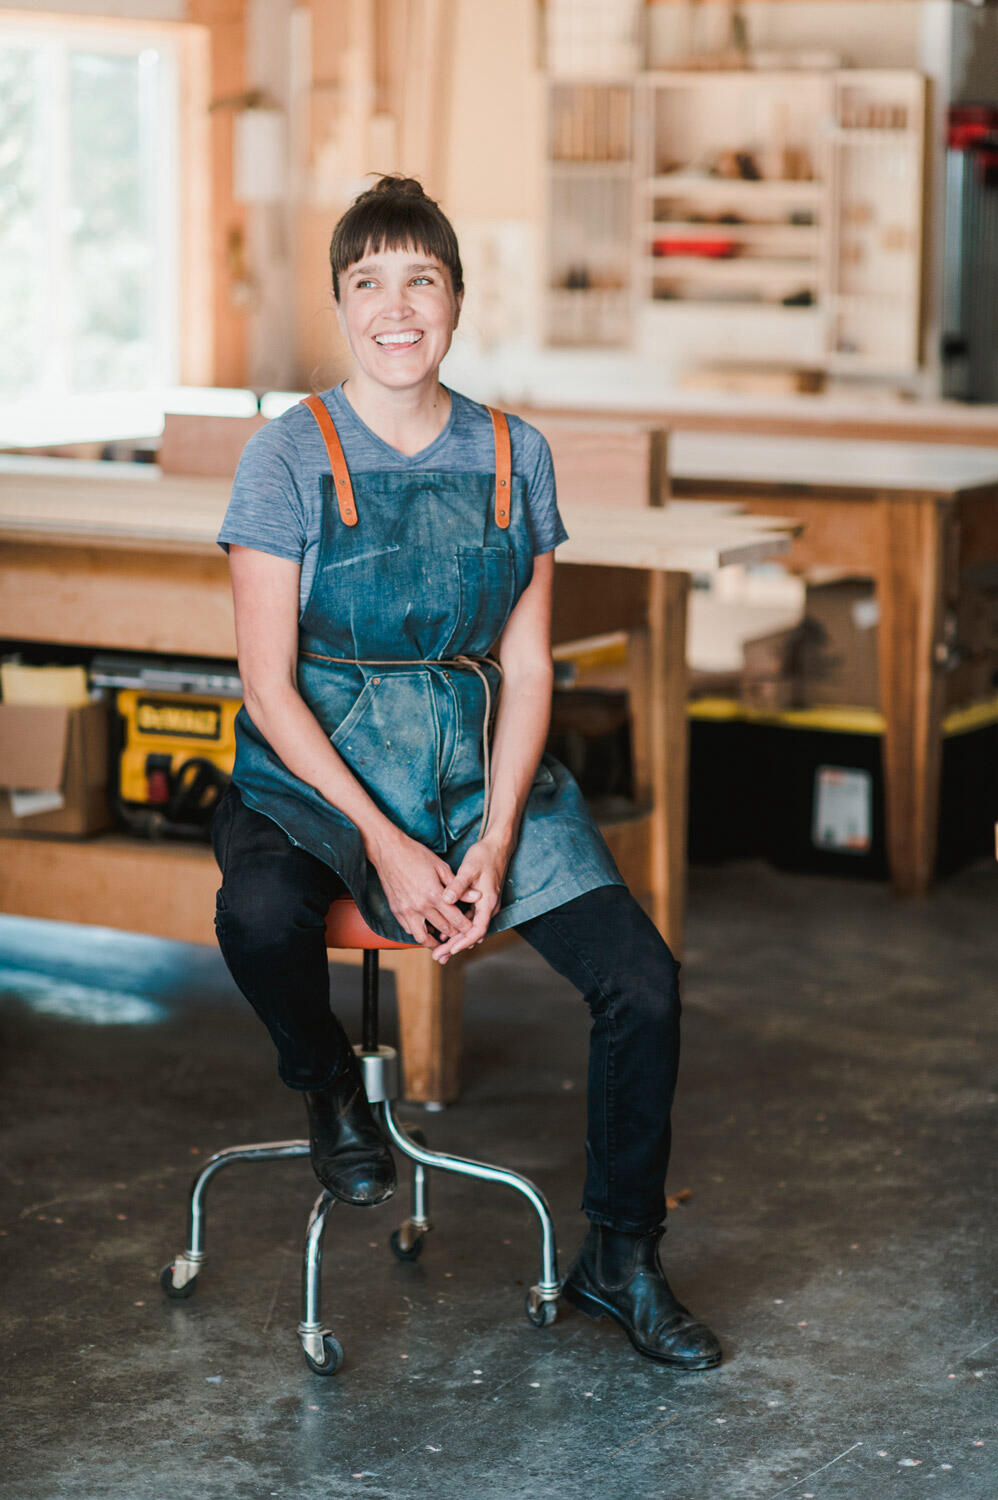 Why materials reign supreme for this Maine-based woodworker